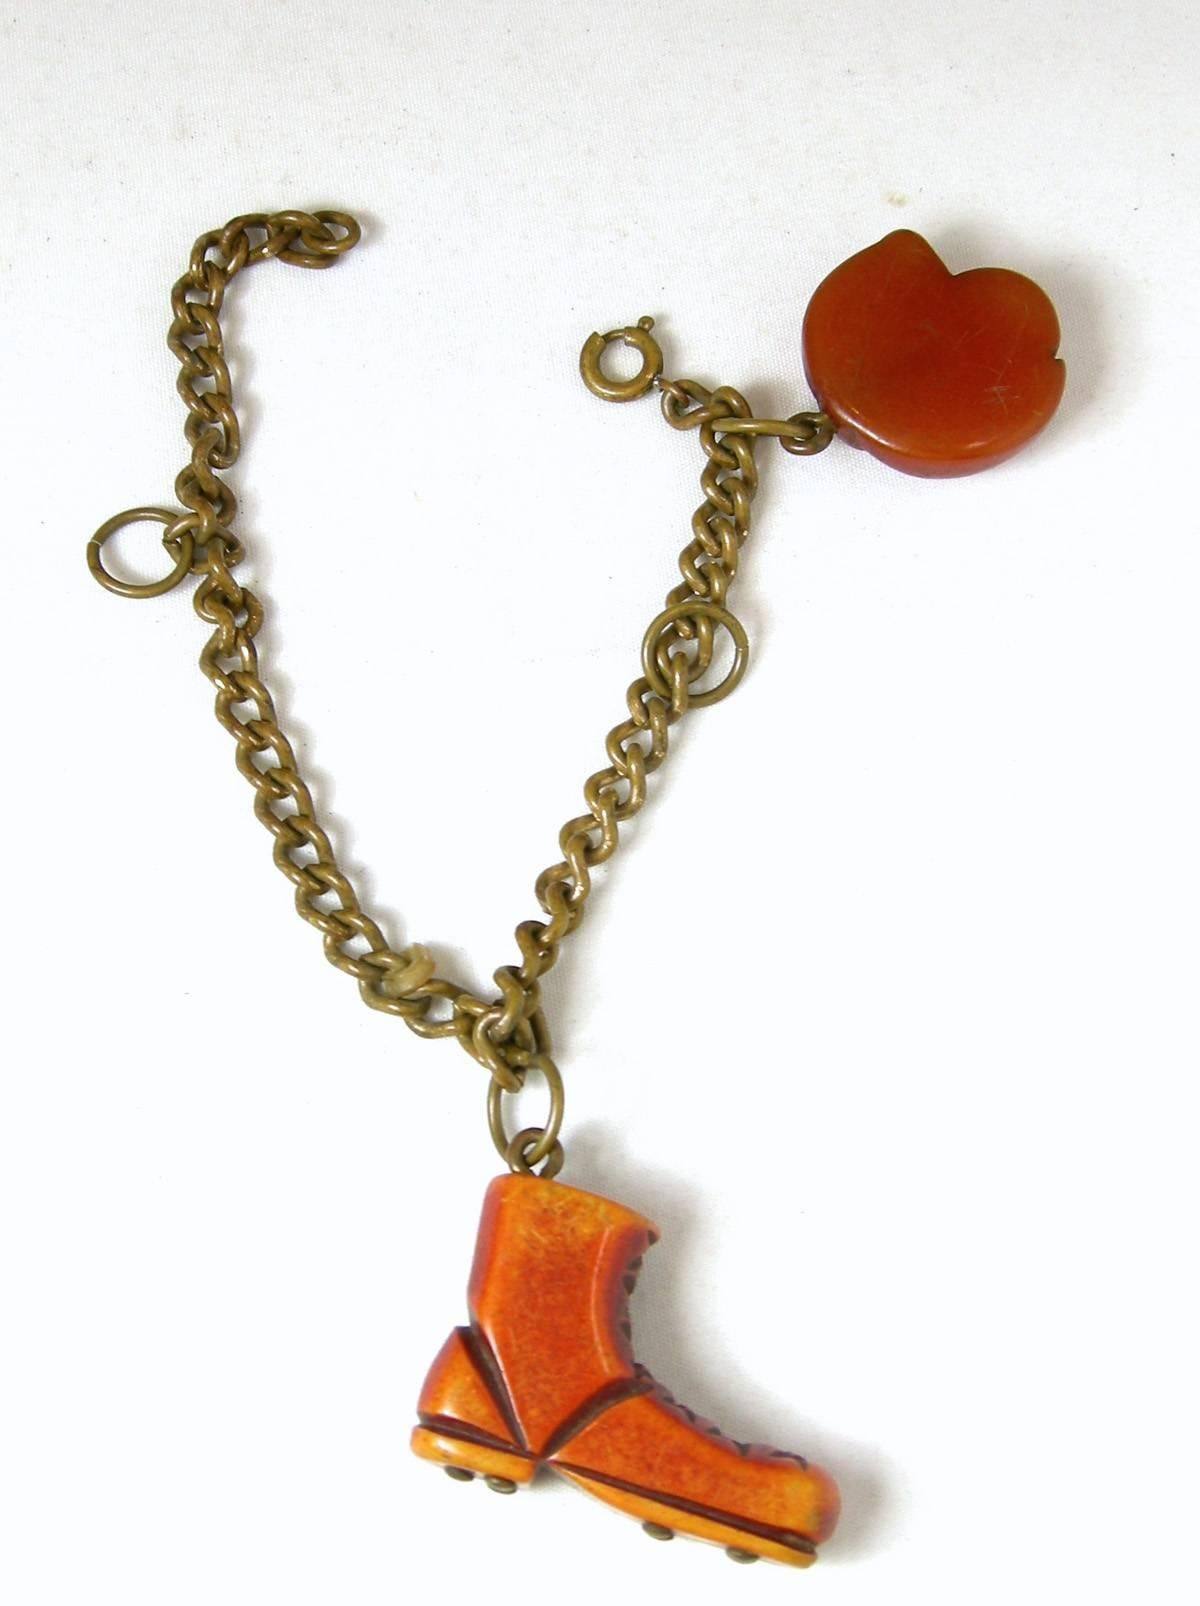 Bakelite Football Vintage Charm Bracelet, 1930s In Excellent Condition For Sale In New York, NY